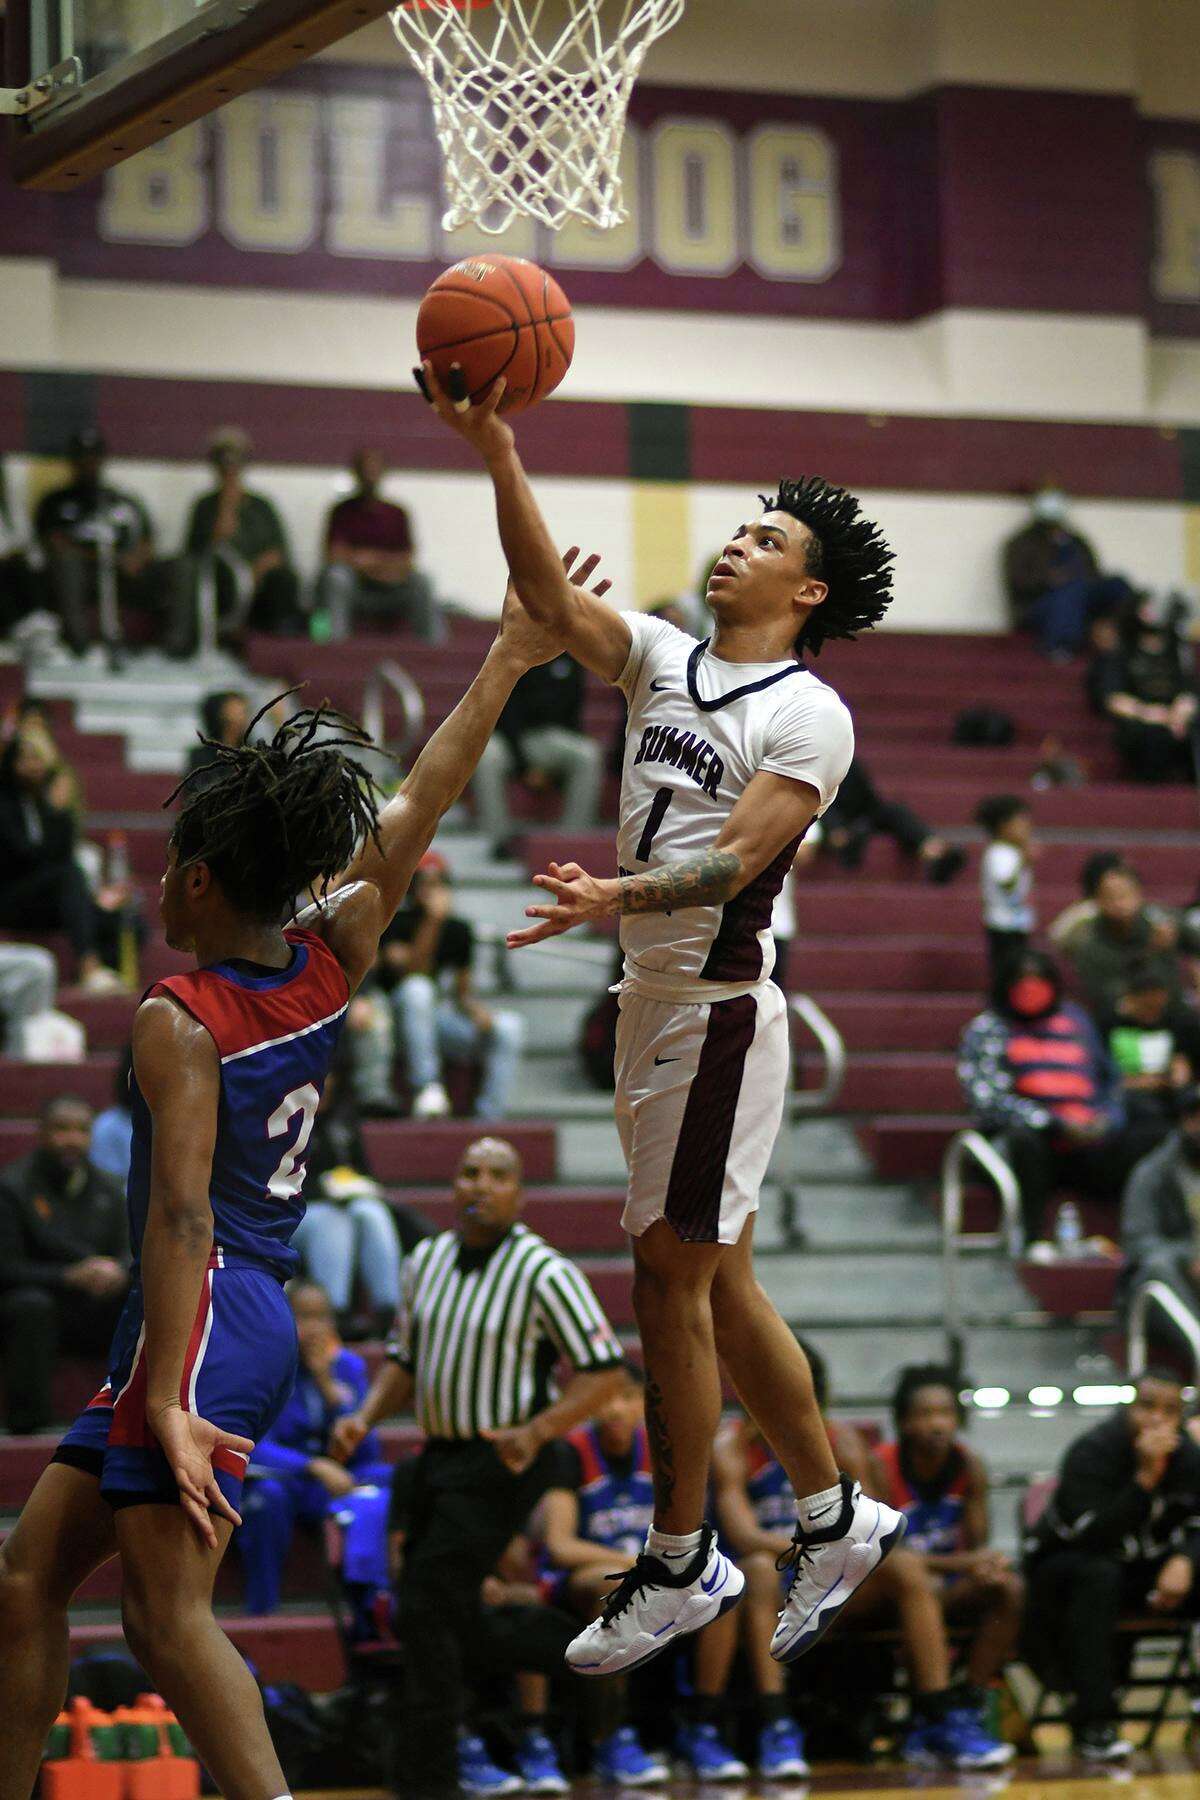 Summer Creek senior guard Jaleen Goodman (1) skies to the hoop against Beaumont West Brook sophomore guard Ashton Simmons (2) late in the second quarter of their District 21-6A matchiup at SCHS on Feb. 2, 2022.